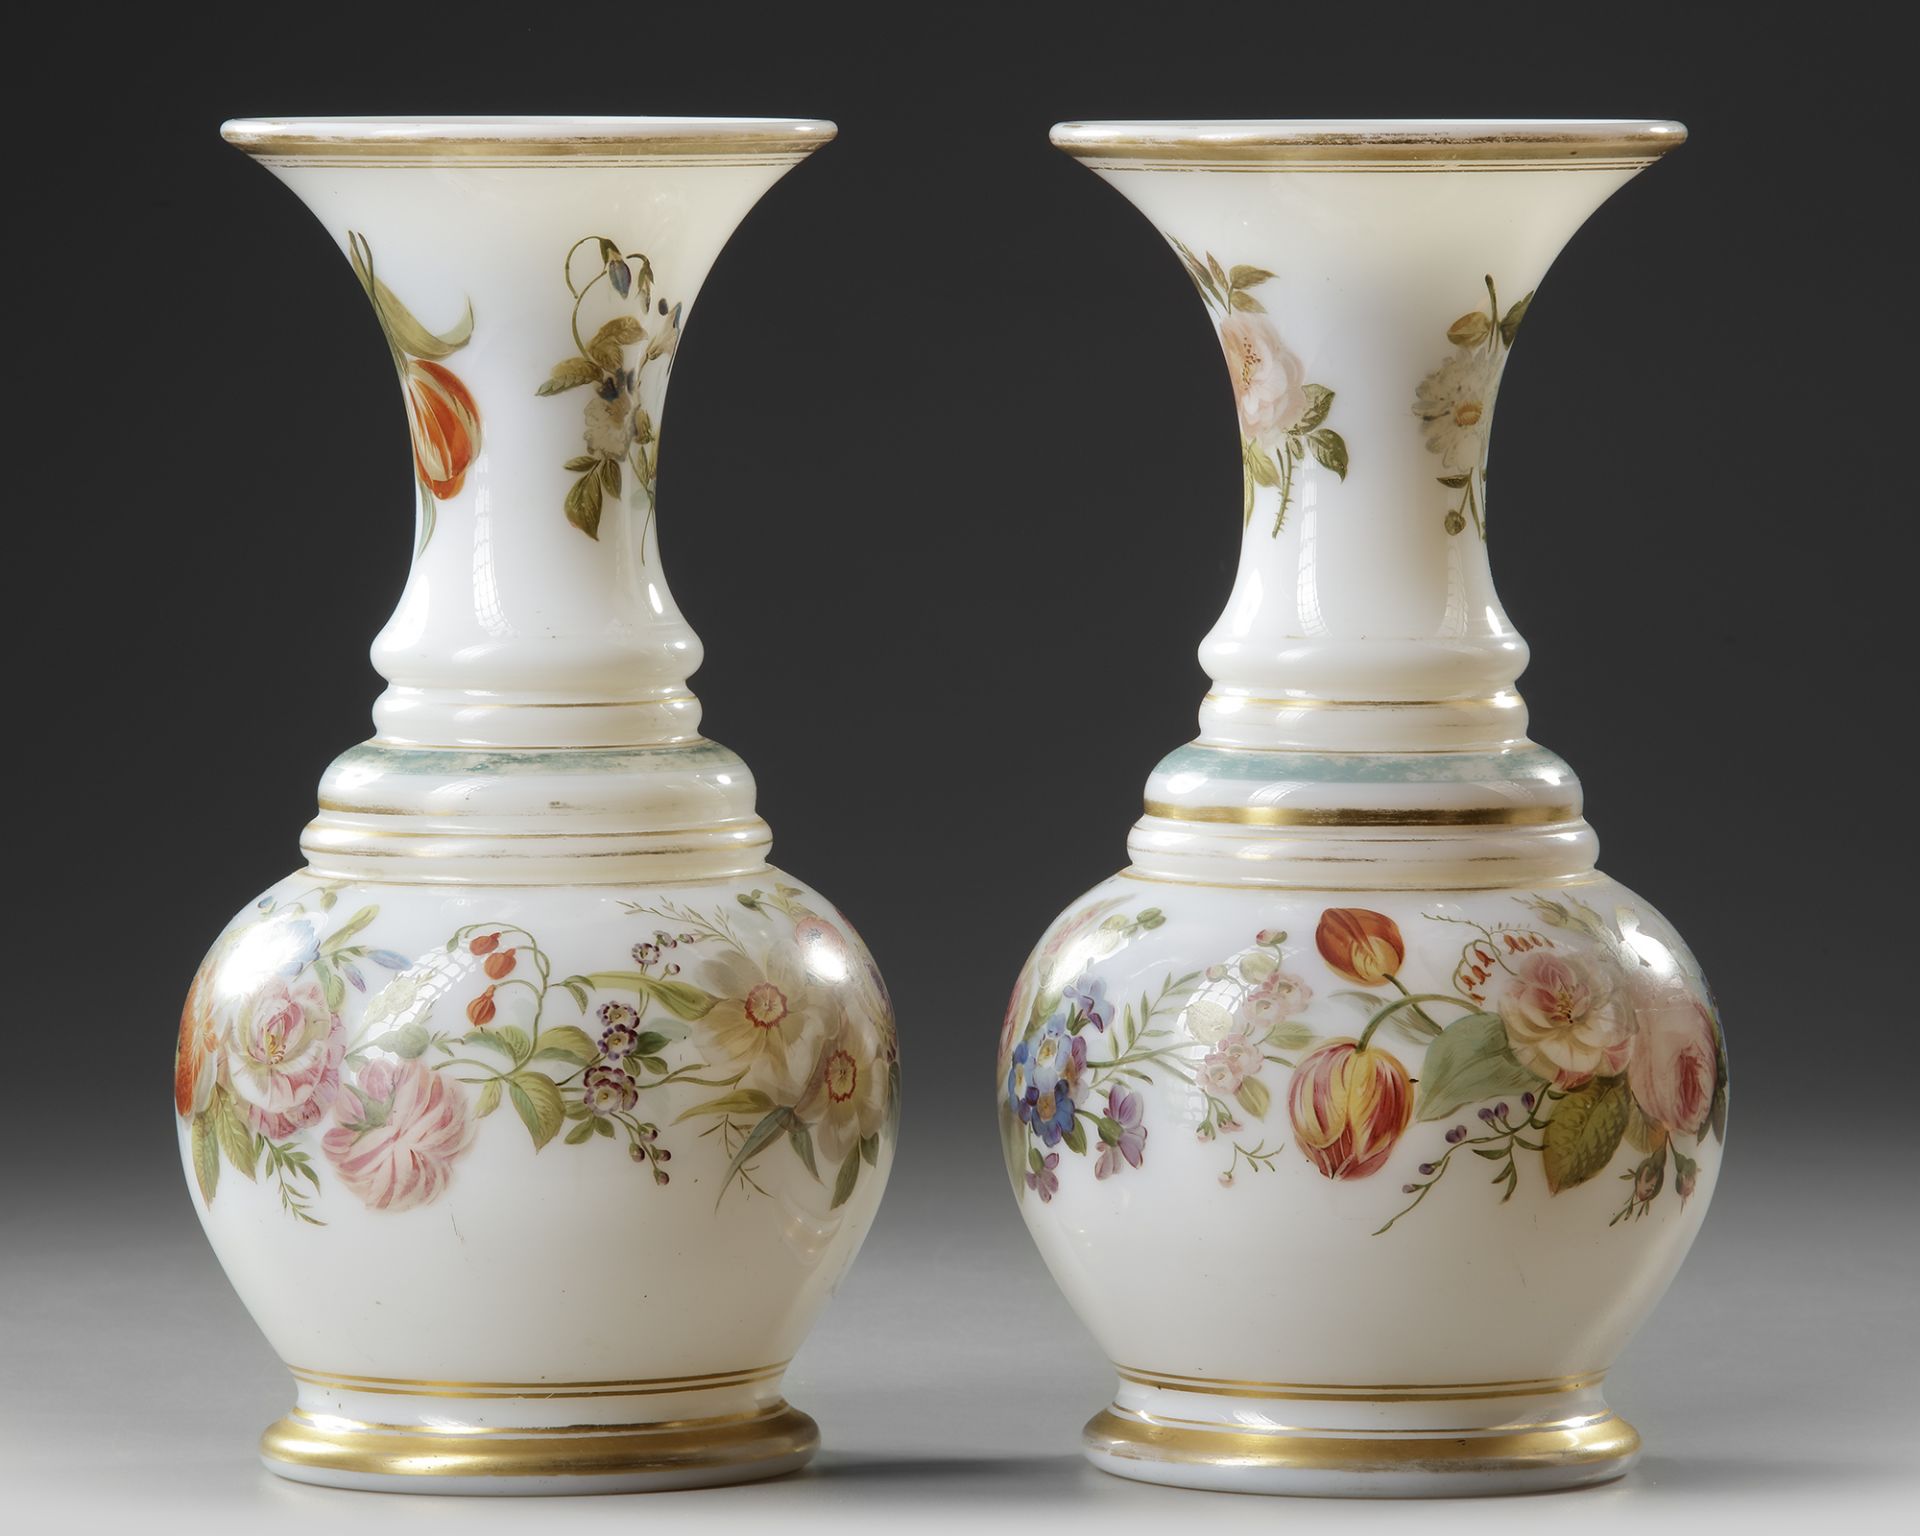 A PAIR OF FRENCH OPALINE VASES, 19TH CENTURY - Image 2 of 3